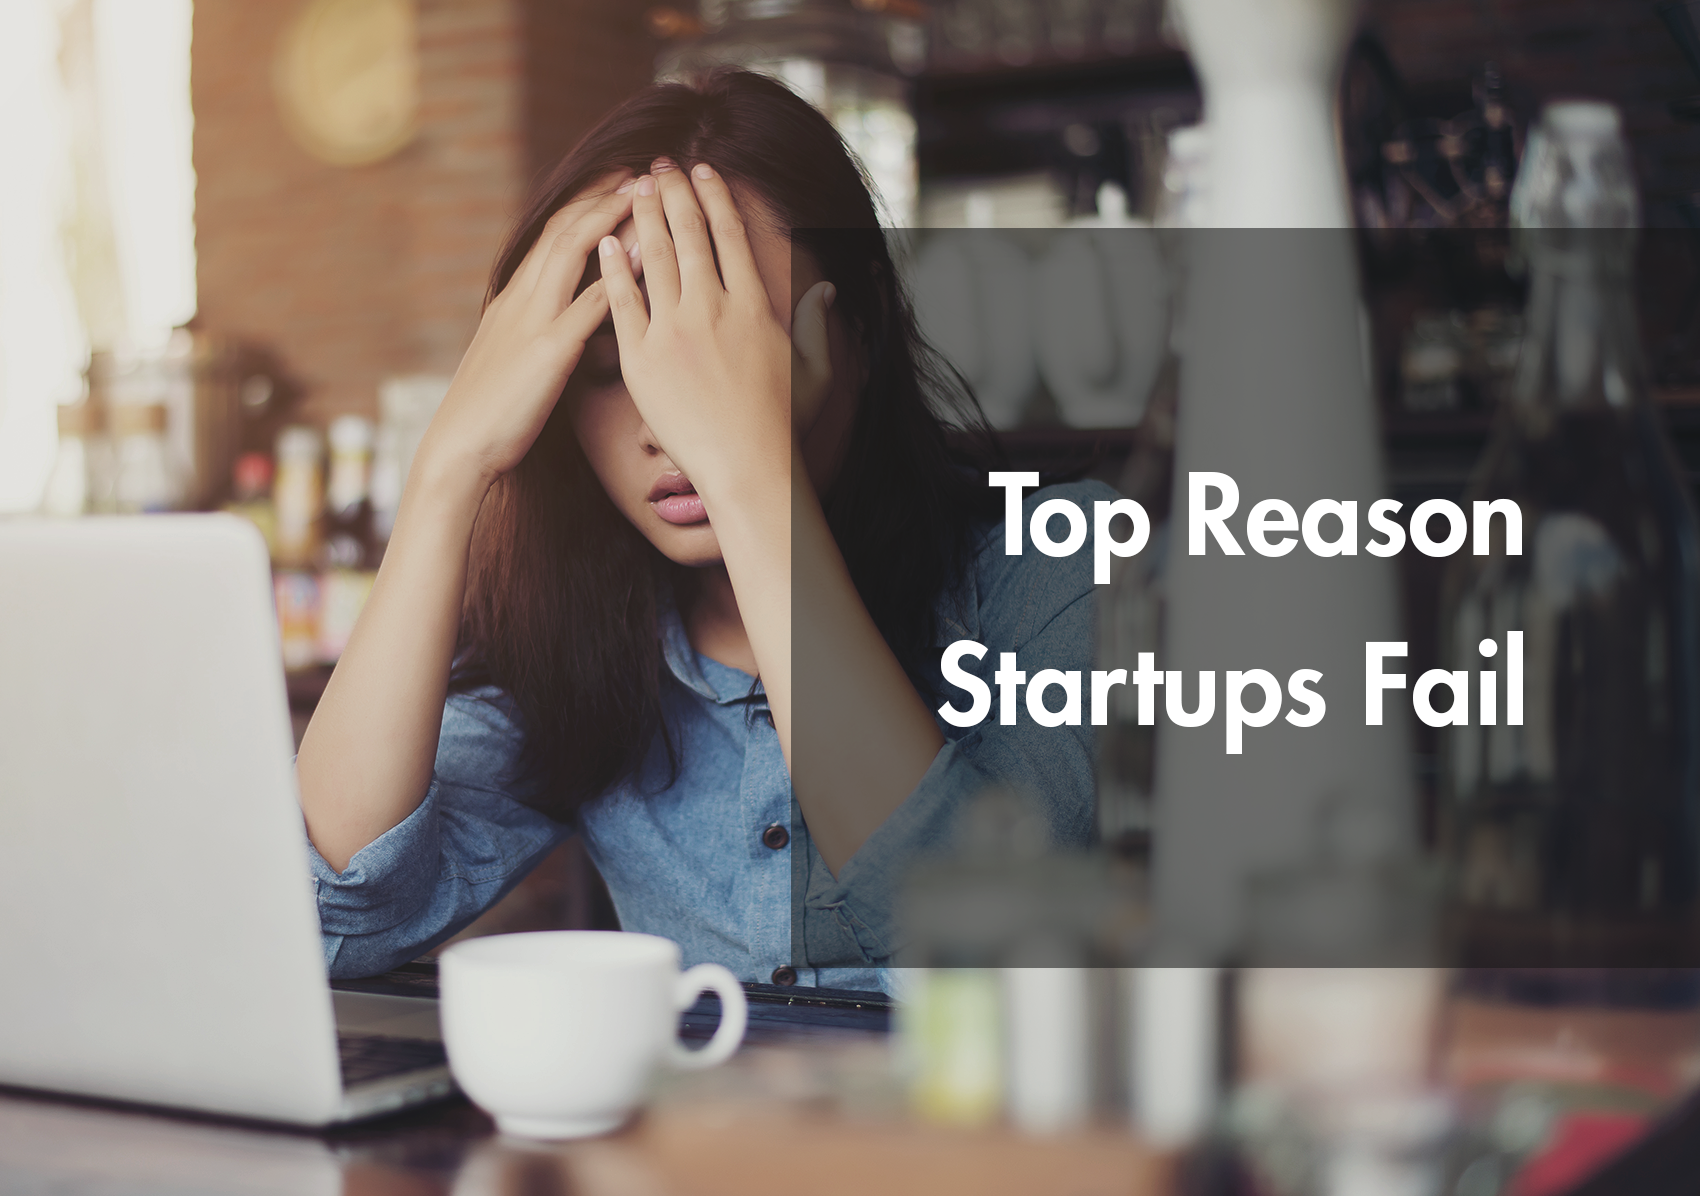 Top Reason Startups Fail: Not Finding the Right Talent